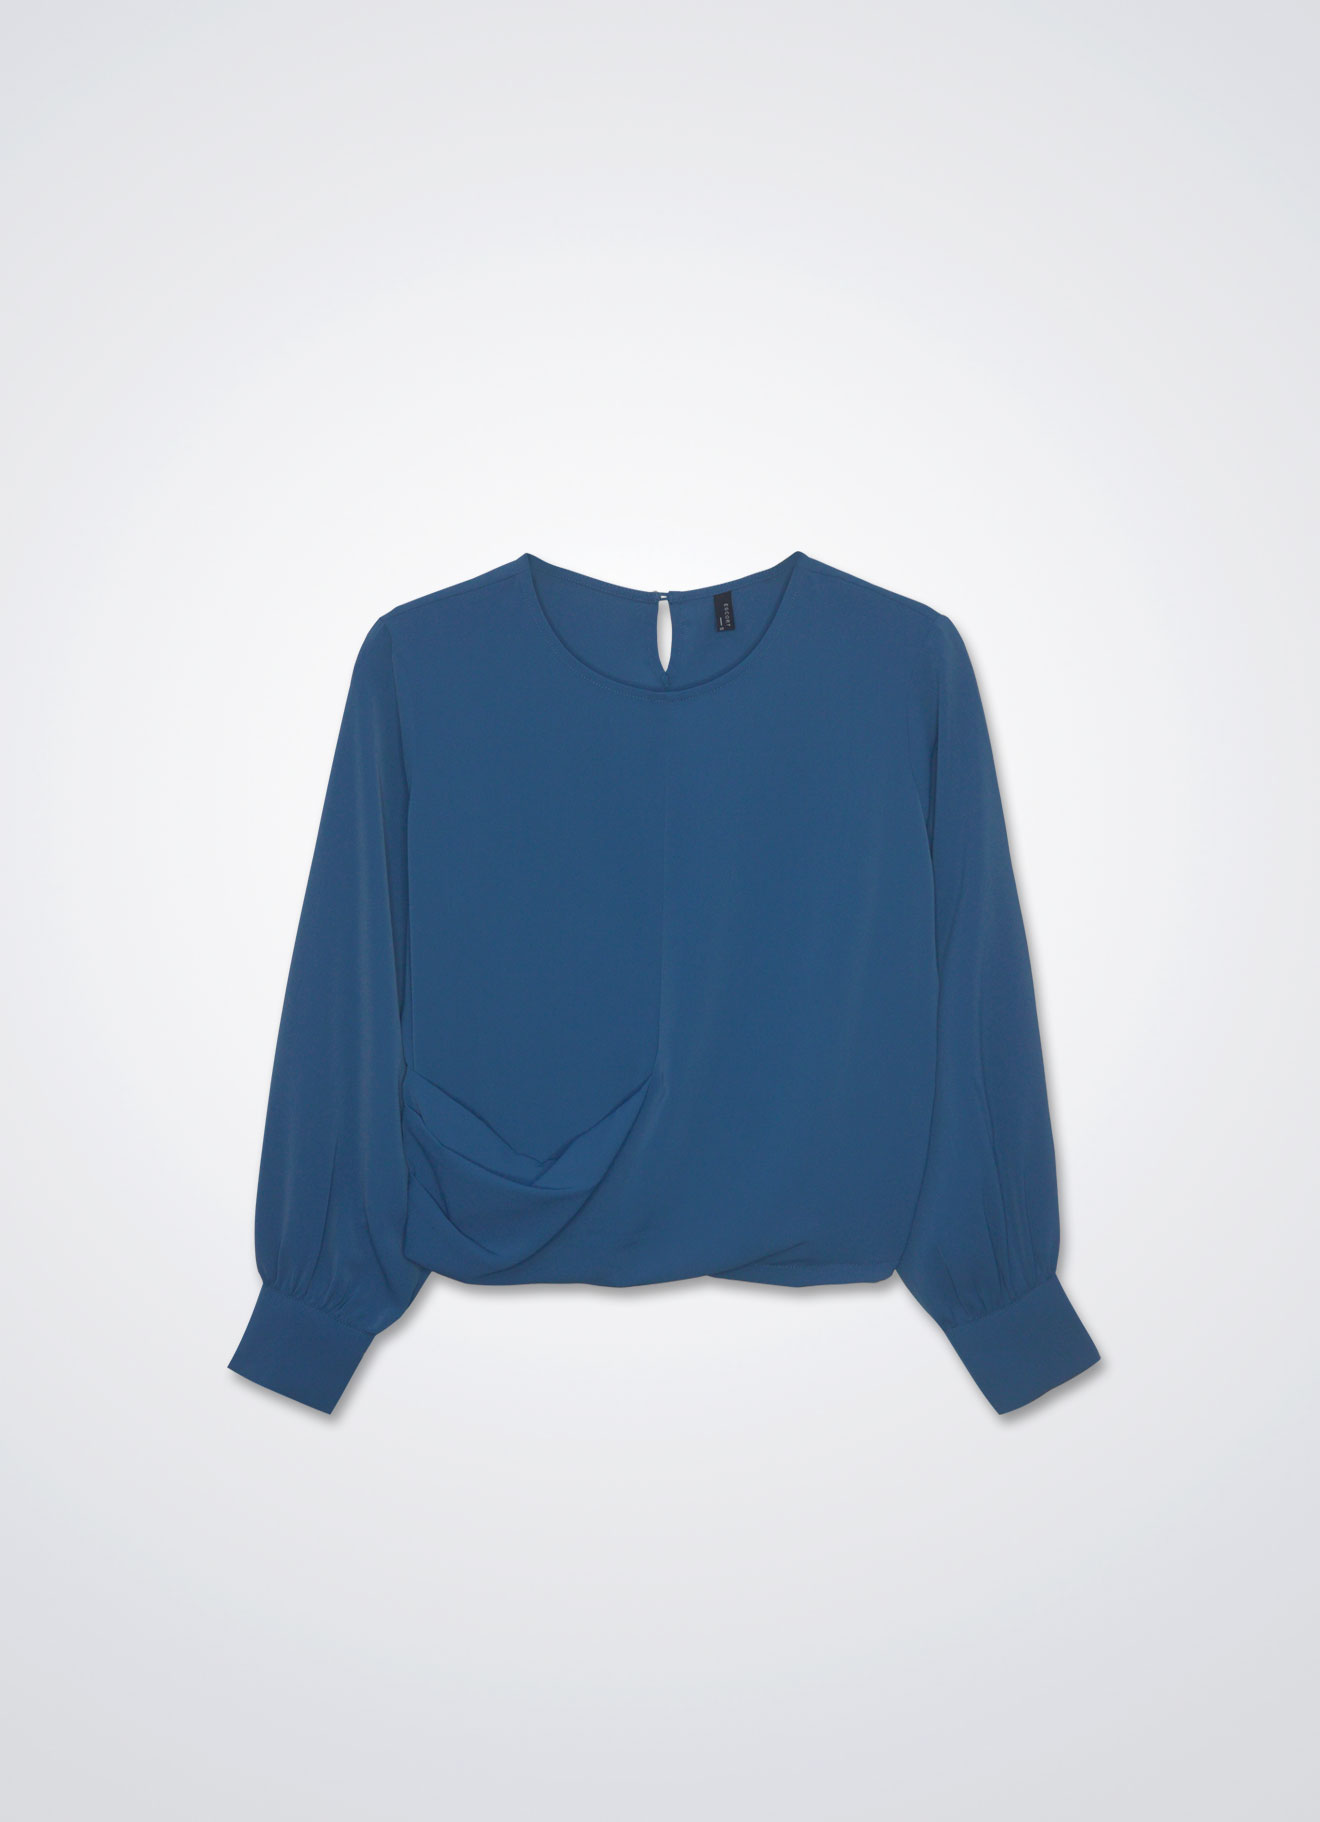 Seaport by Long Sleeve Top